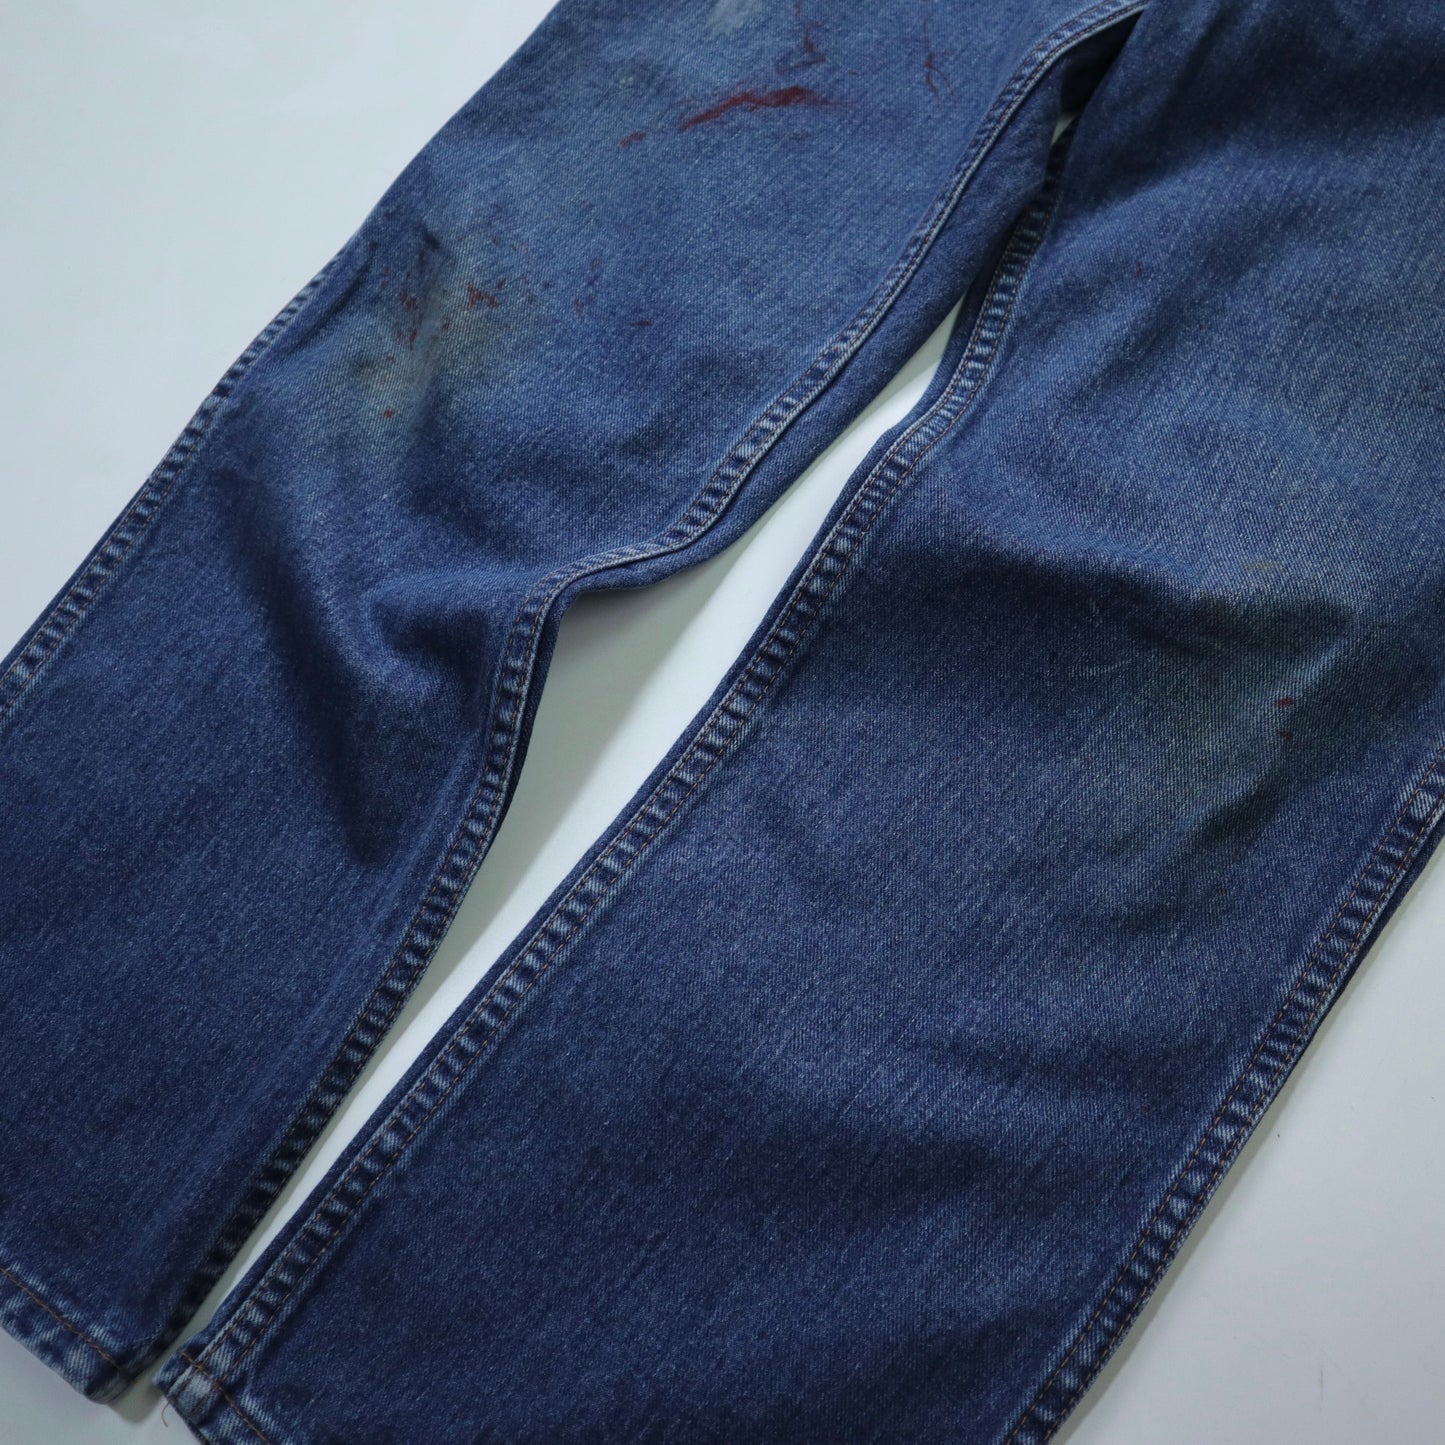 (34W) 70s American-made Saddle King straight-leg jeans with Talon zipper